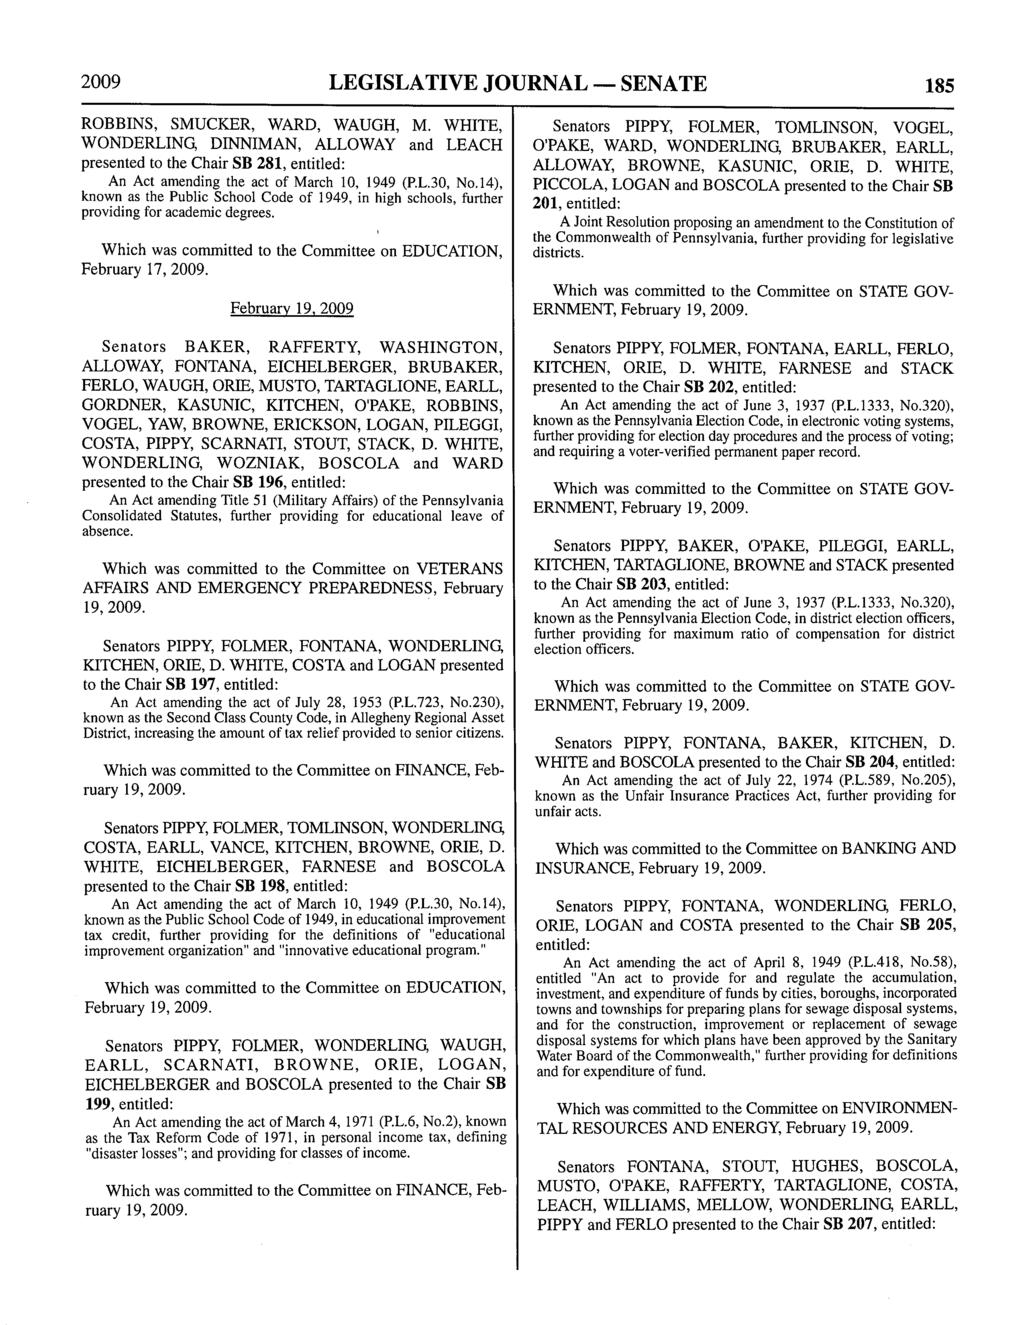 2009 LEGISLATIVE JOURNAL - SENATE 185 ROBBINS, SMUCKER, WARD, WAUGH, M. WHITE, WONDERLING, DINNIMAN, ALLOWAY and LEACH presented to the Chair SB 281, An Act amending the act of March 10, 1949 (P.L.30, No.